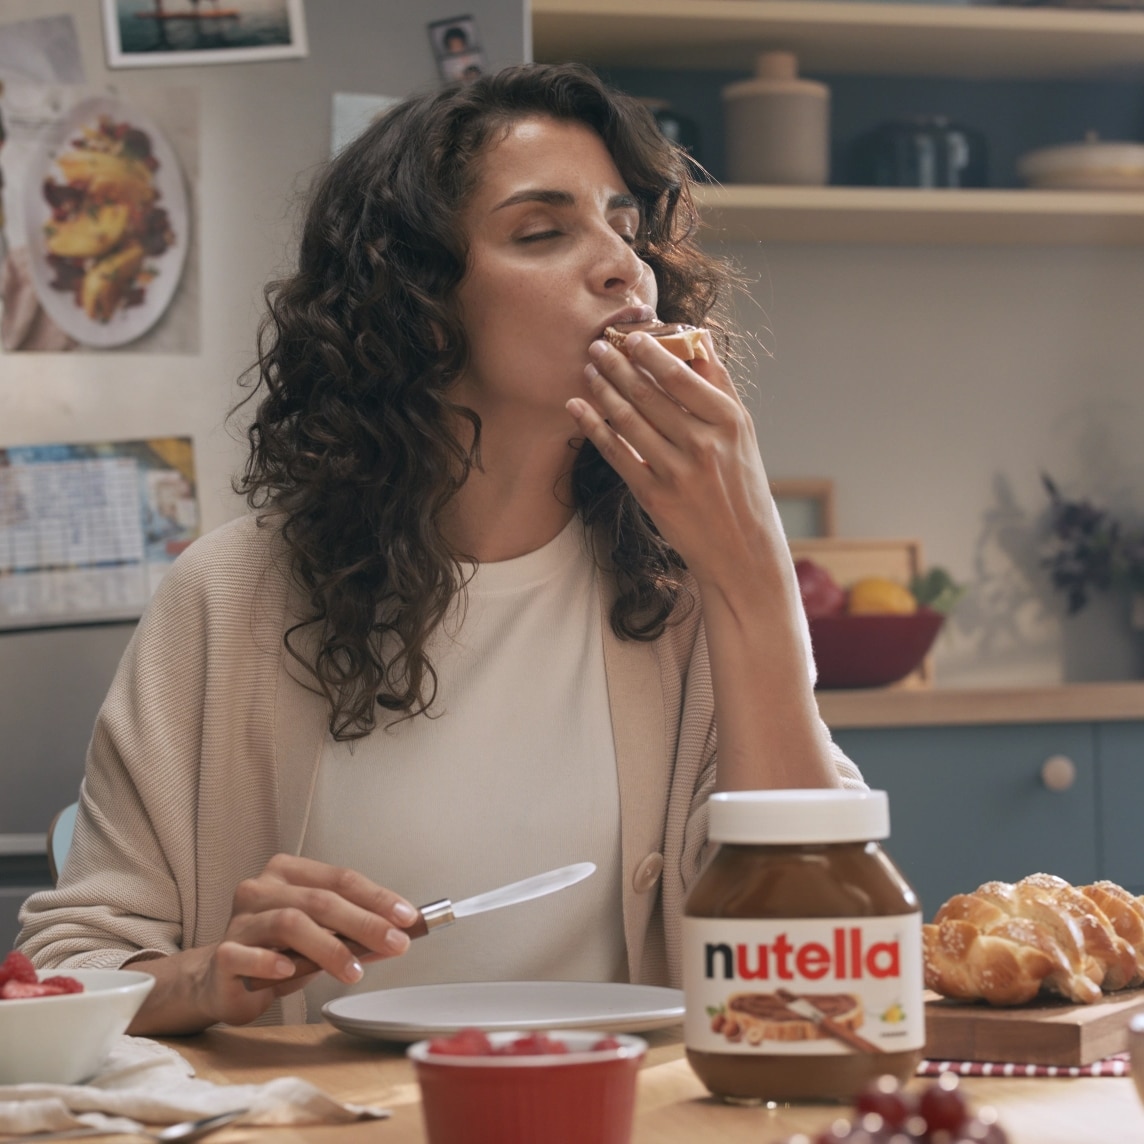 Strike a pose with Nutella